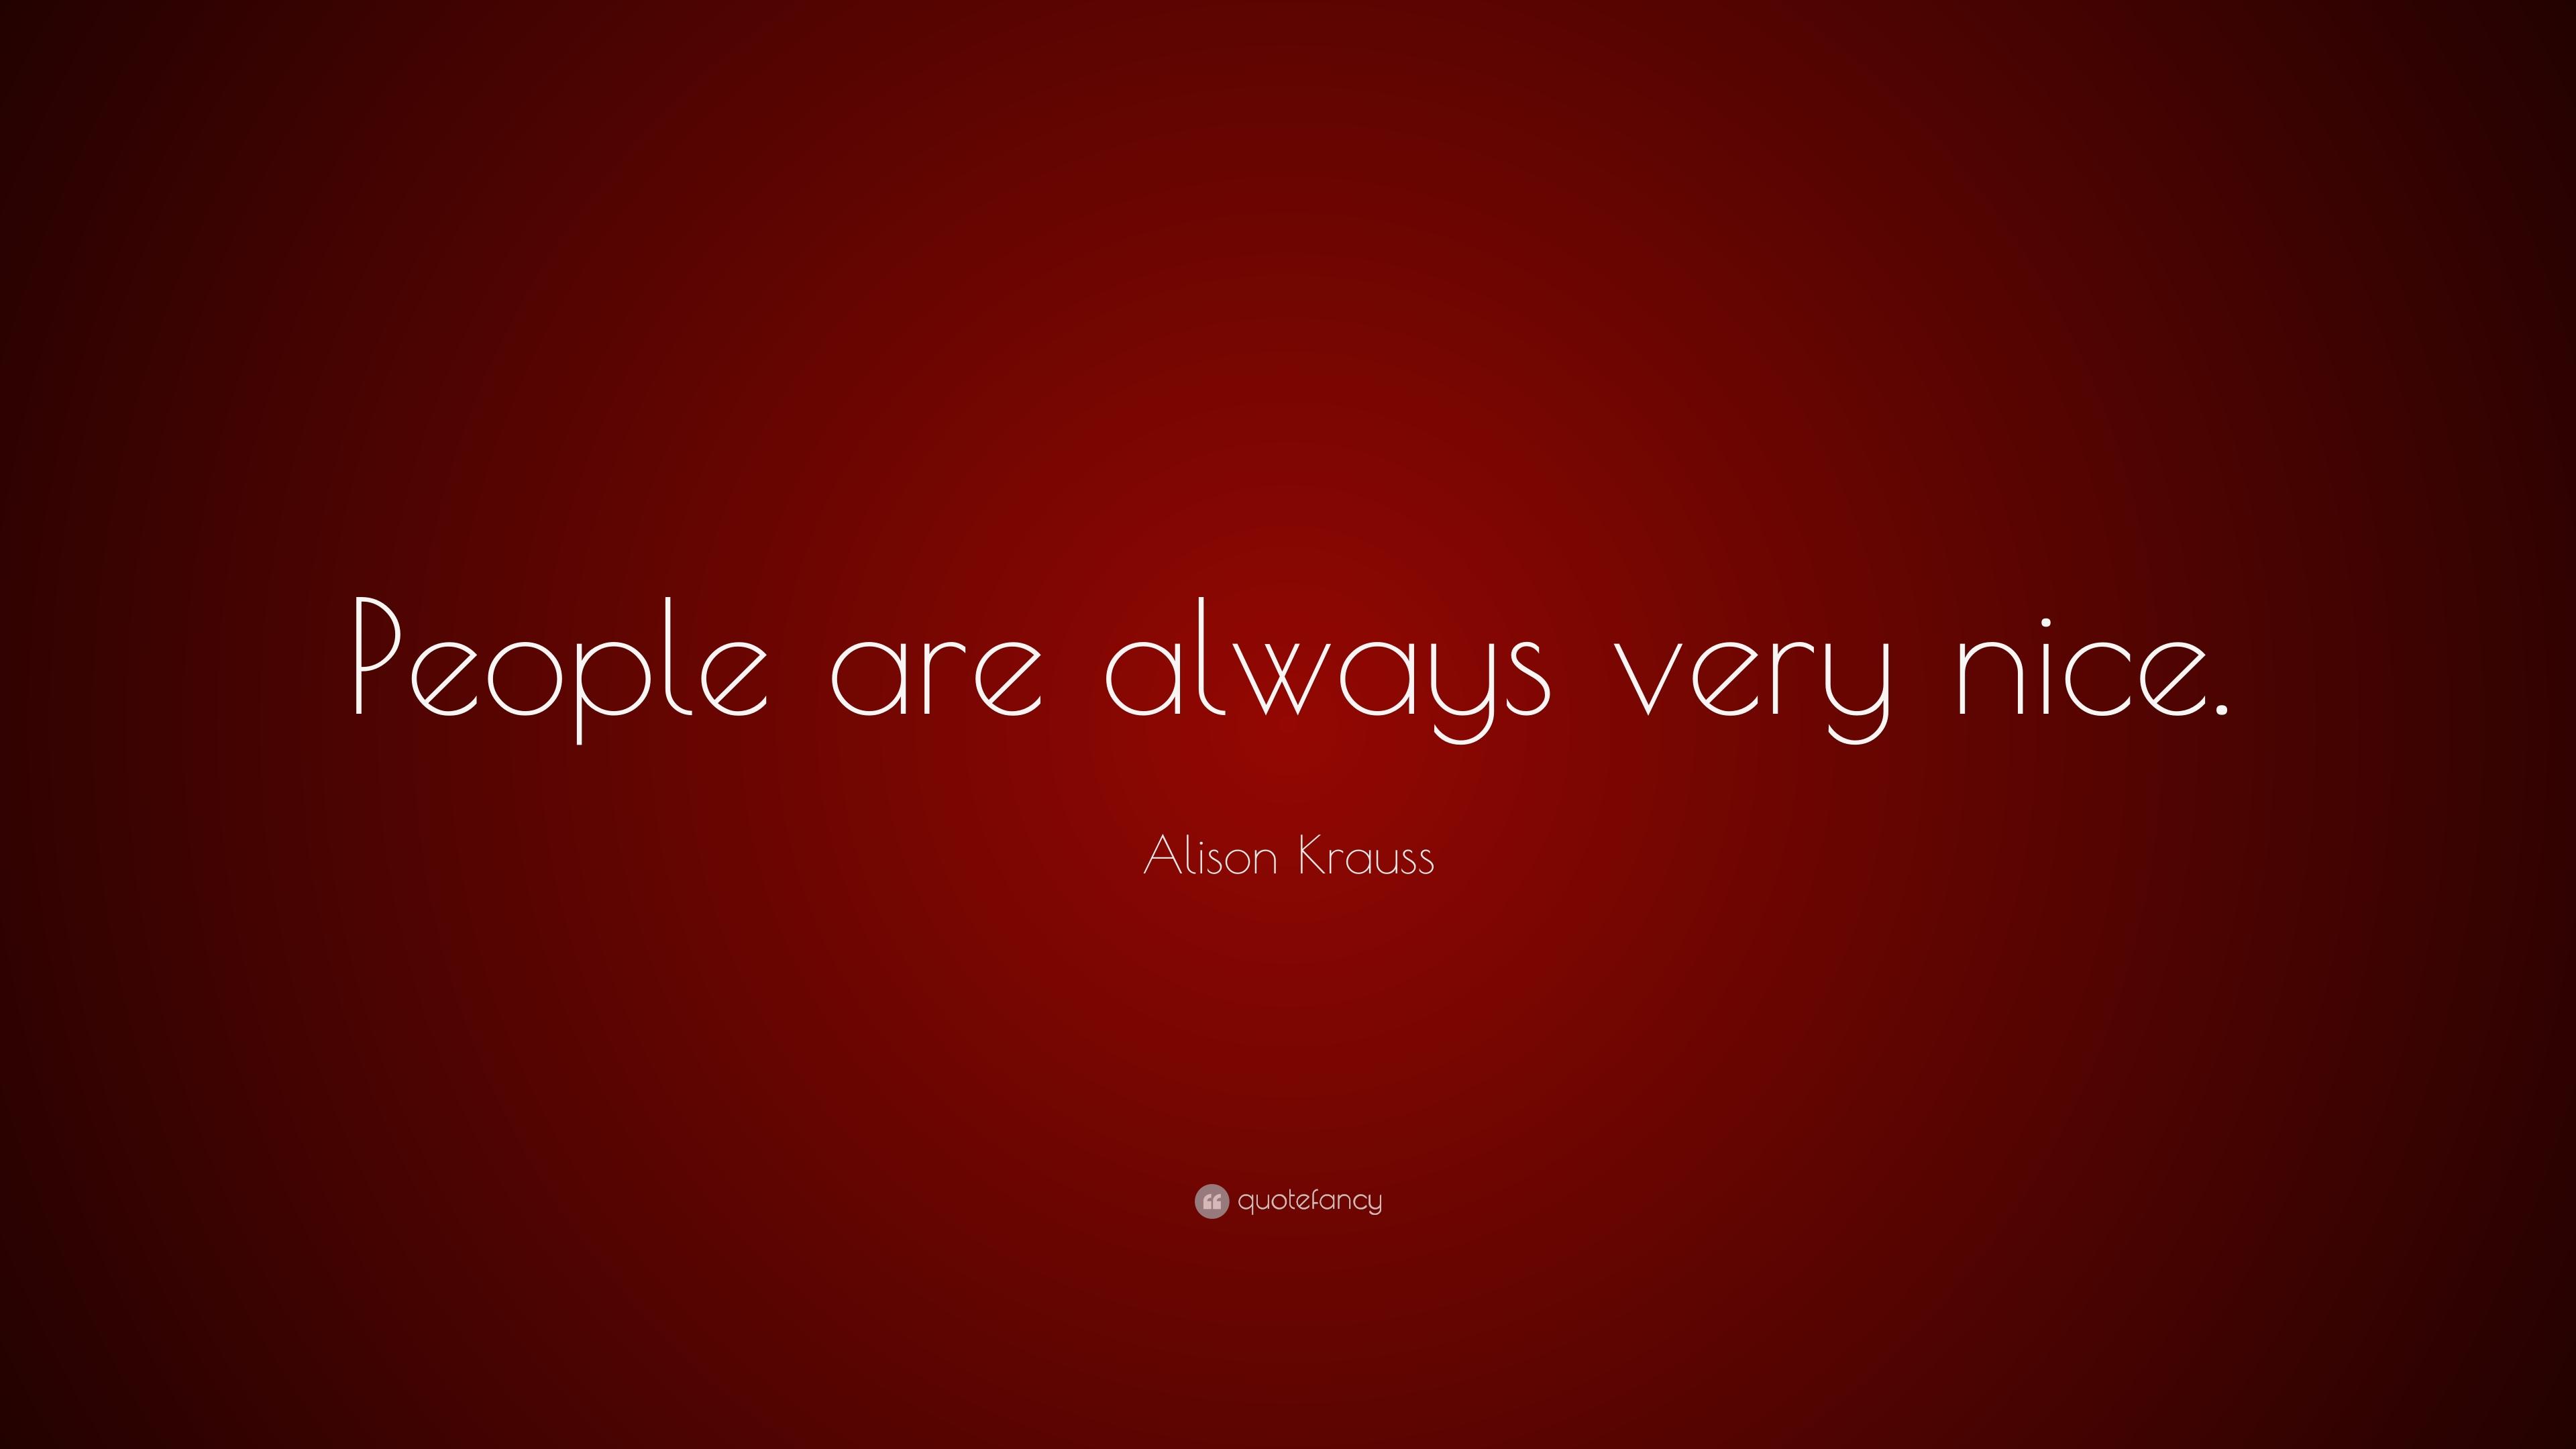 Alison Krauss Quote: “People are always very nice.” 7 wallpaper